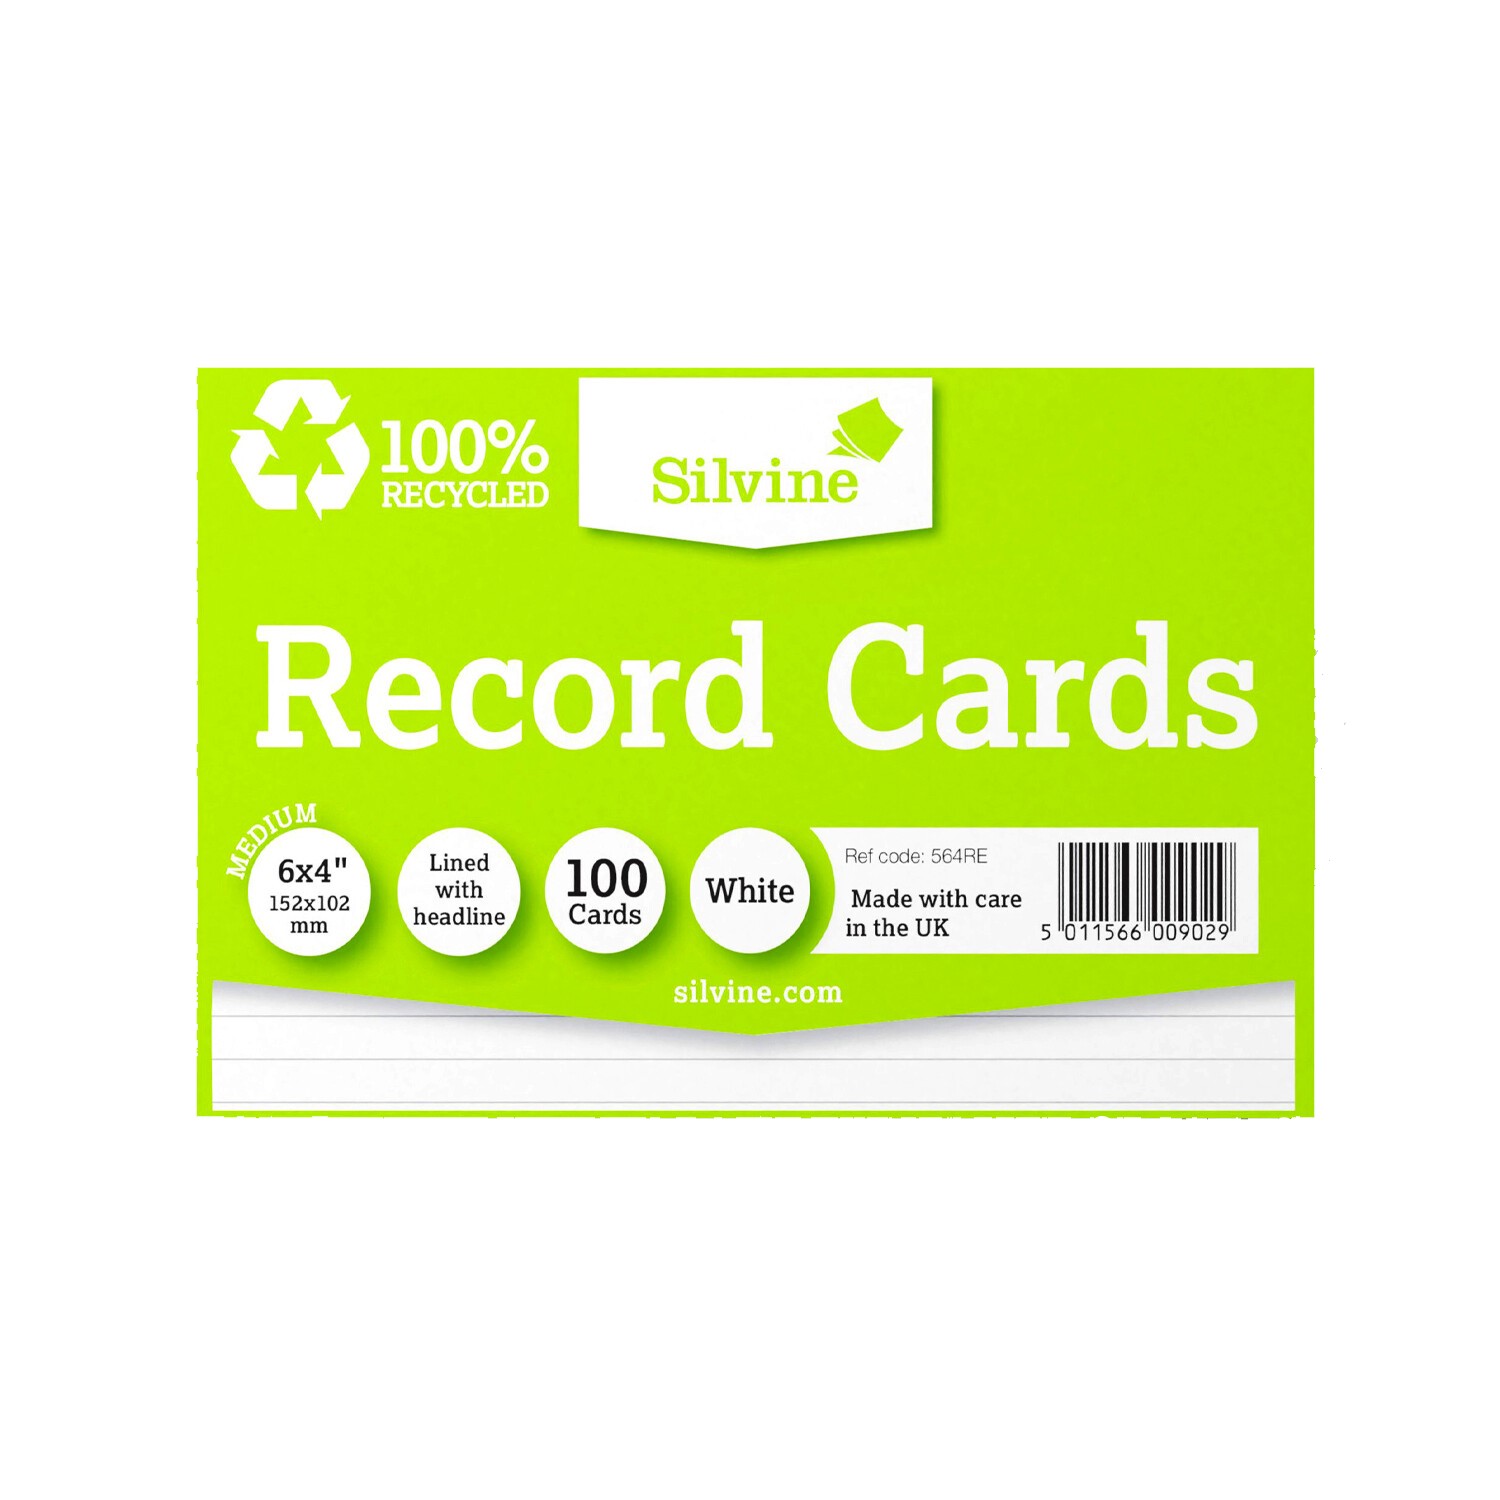 Pack of 100 Silvine Record Cards 100% Recycled Image 1